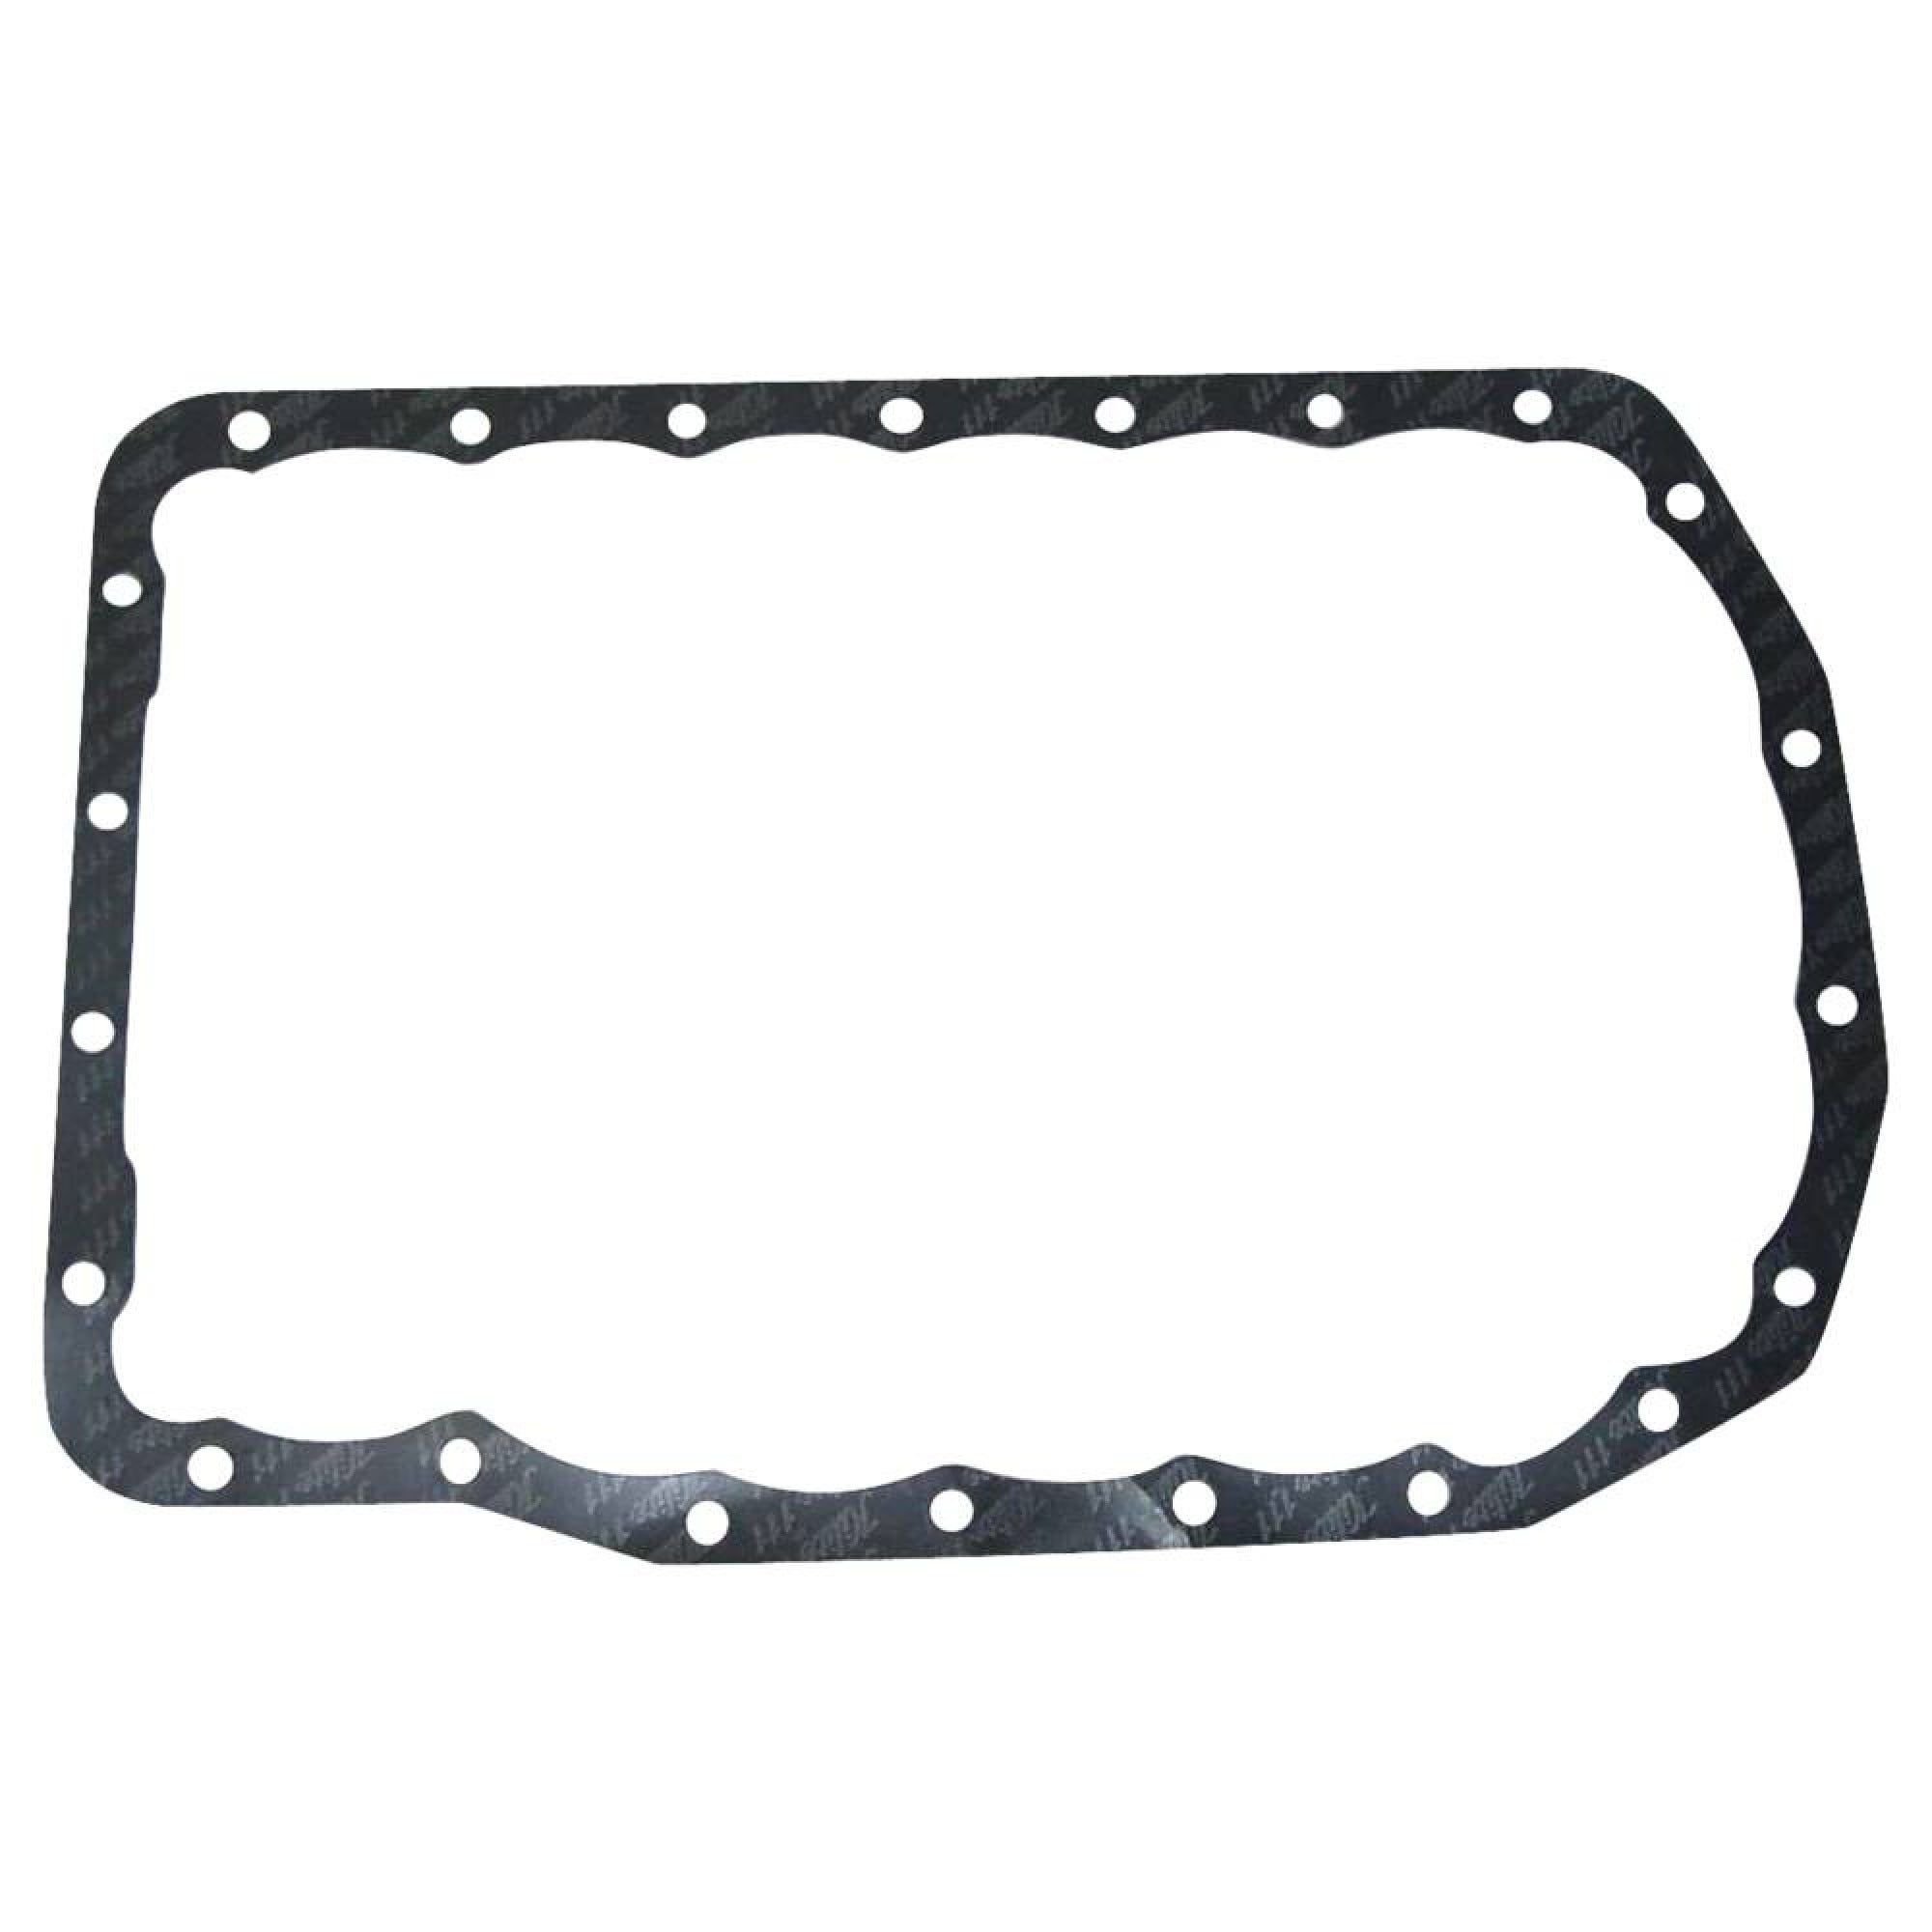 Oil Pan Gasket for Ford/ Holland 2300 1824481, D0NN6710B; 1109-9406 